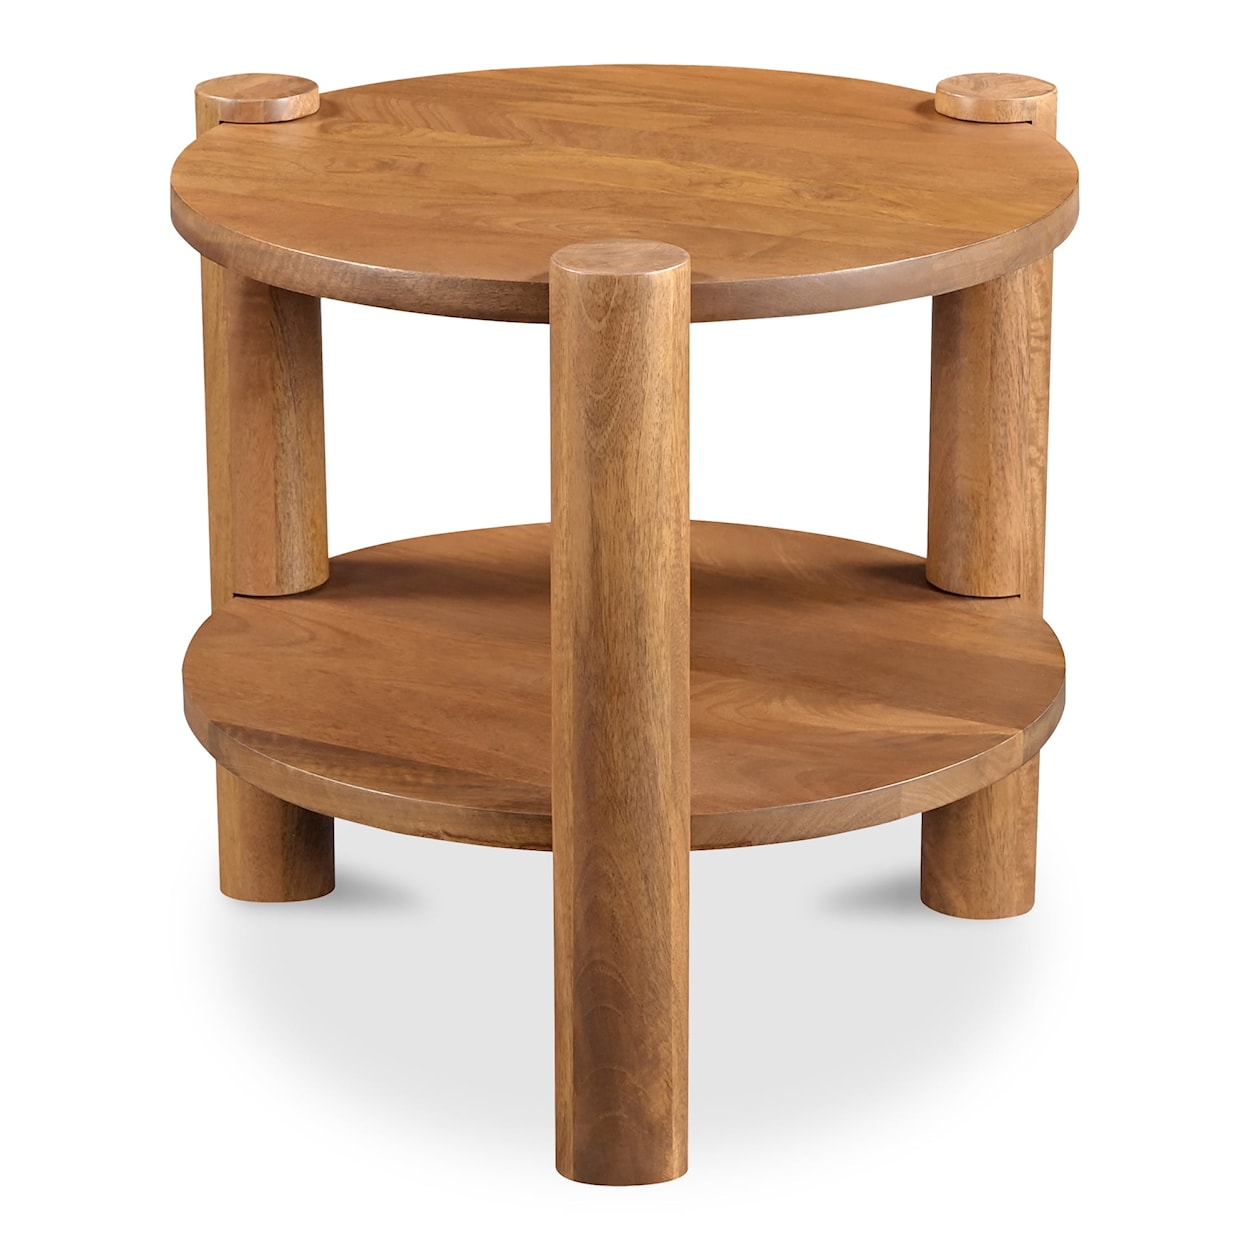 Moe's Home Collection Olsen Accent Table